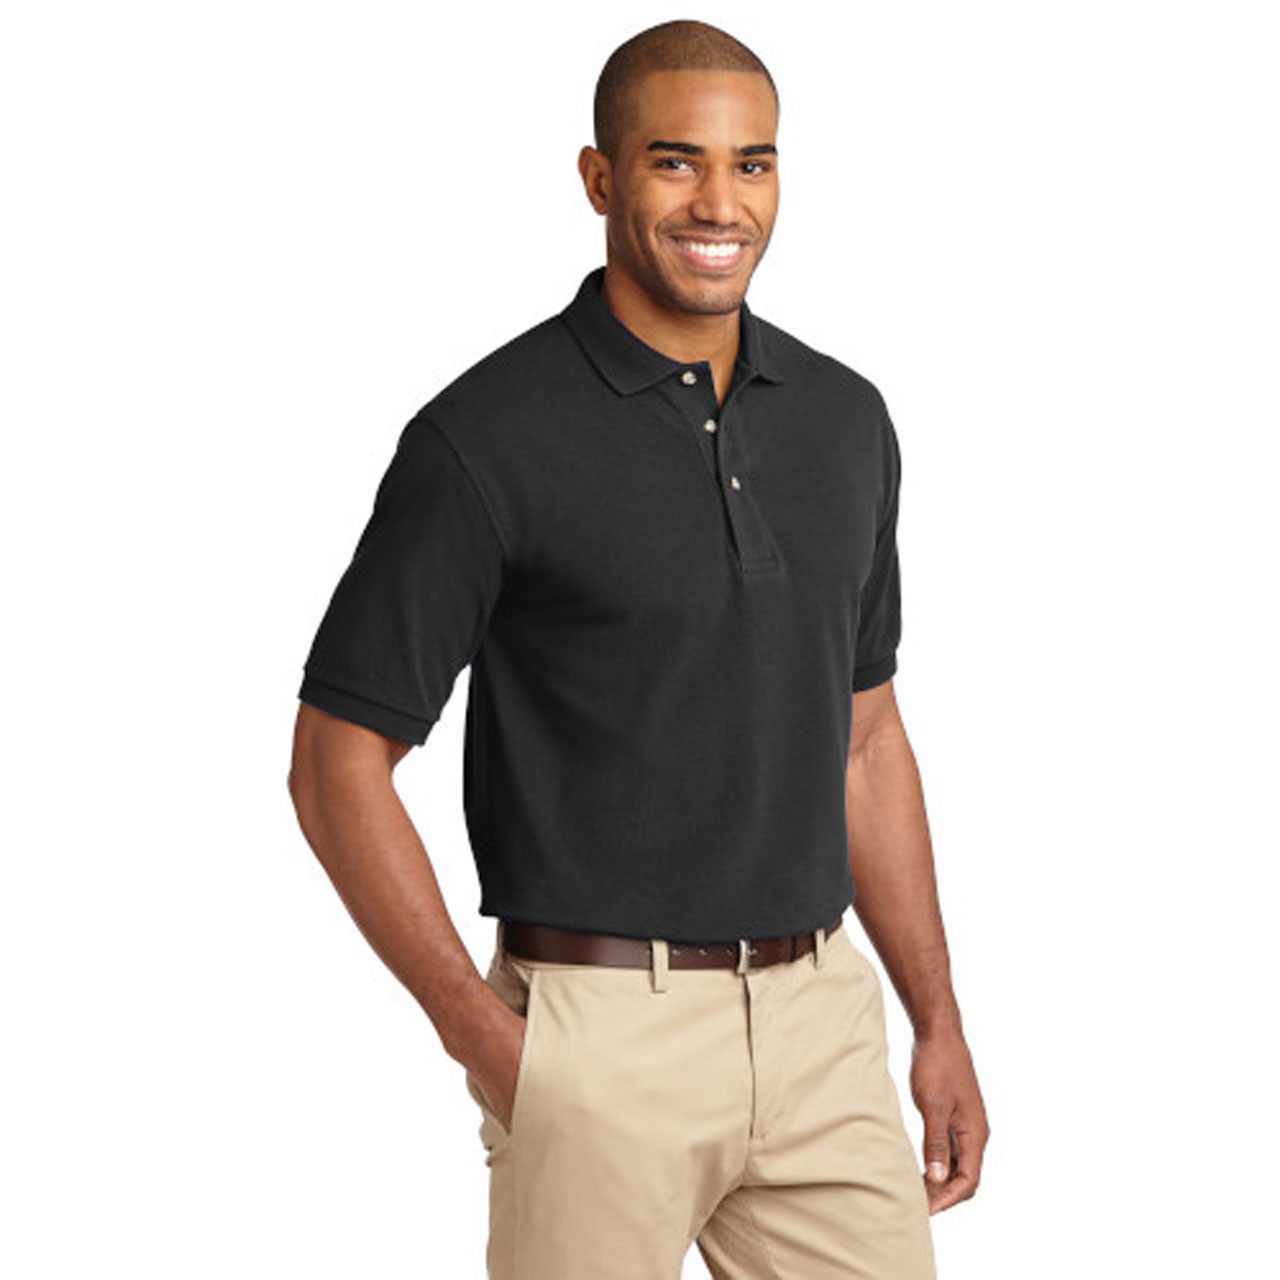 Does the boxercraft wholesale polo S have a special feature on the right sleeve?